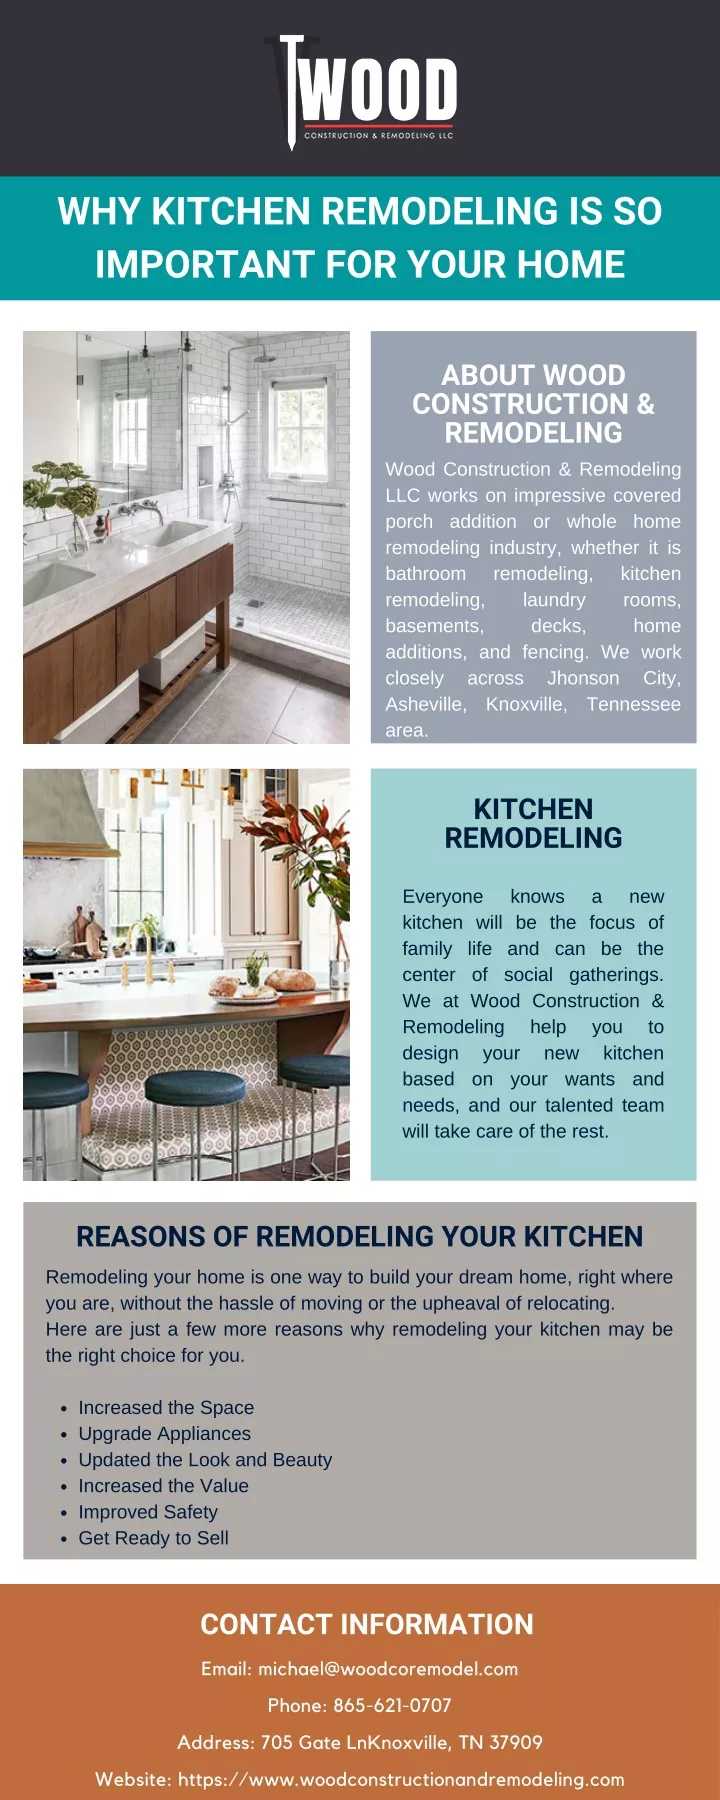 why kitchen remodeling is so important for your